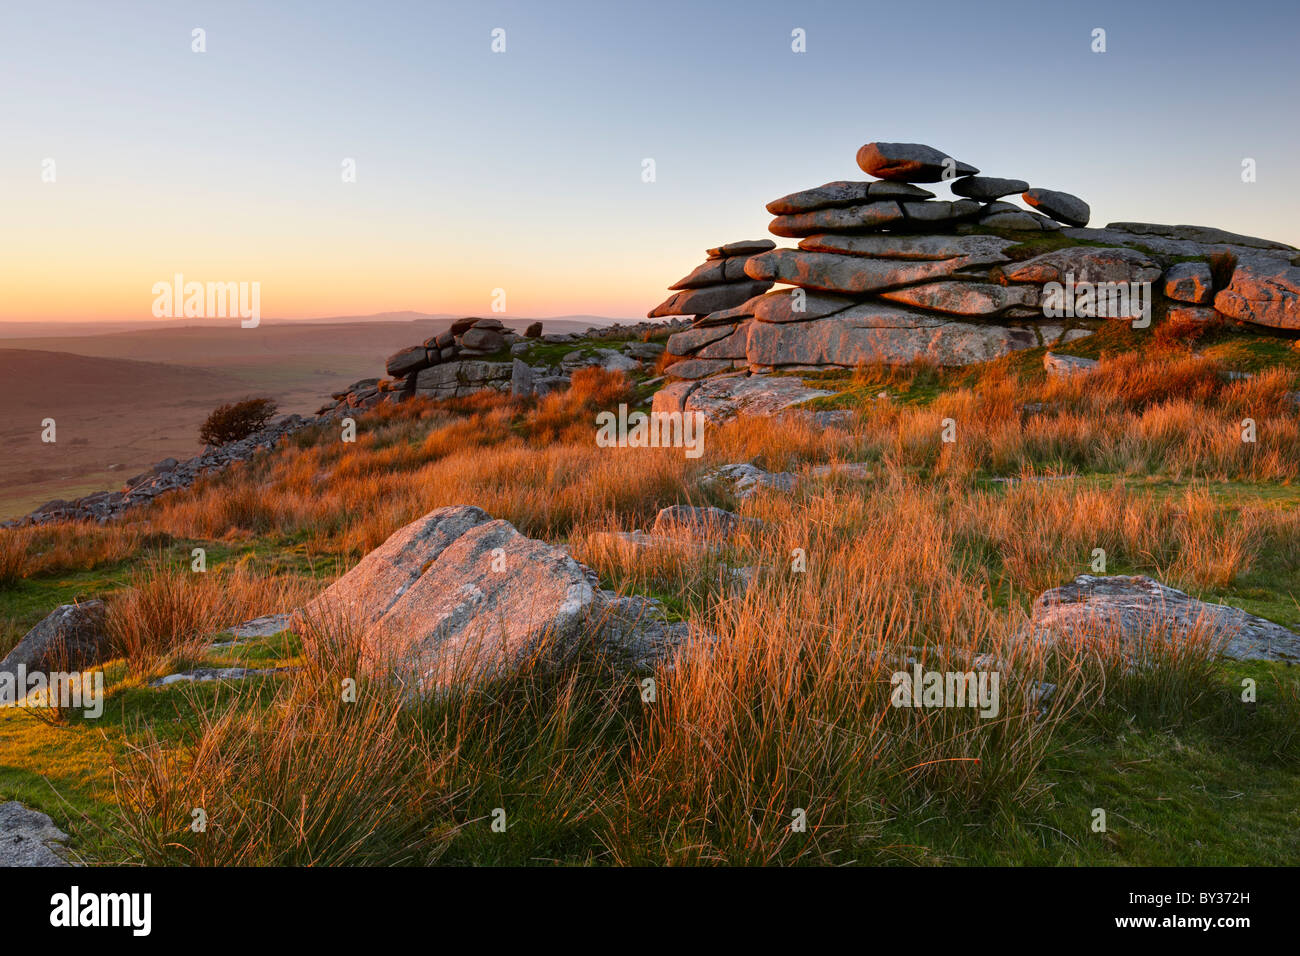 The glow of the evening sun highlights the grasses and rocky outcrop of Stowe's Hill high up on Bodmin Moor. Stock Photo